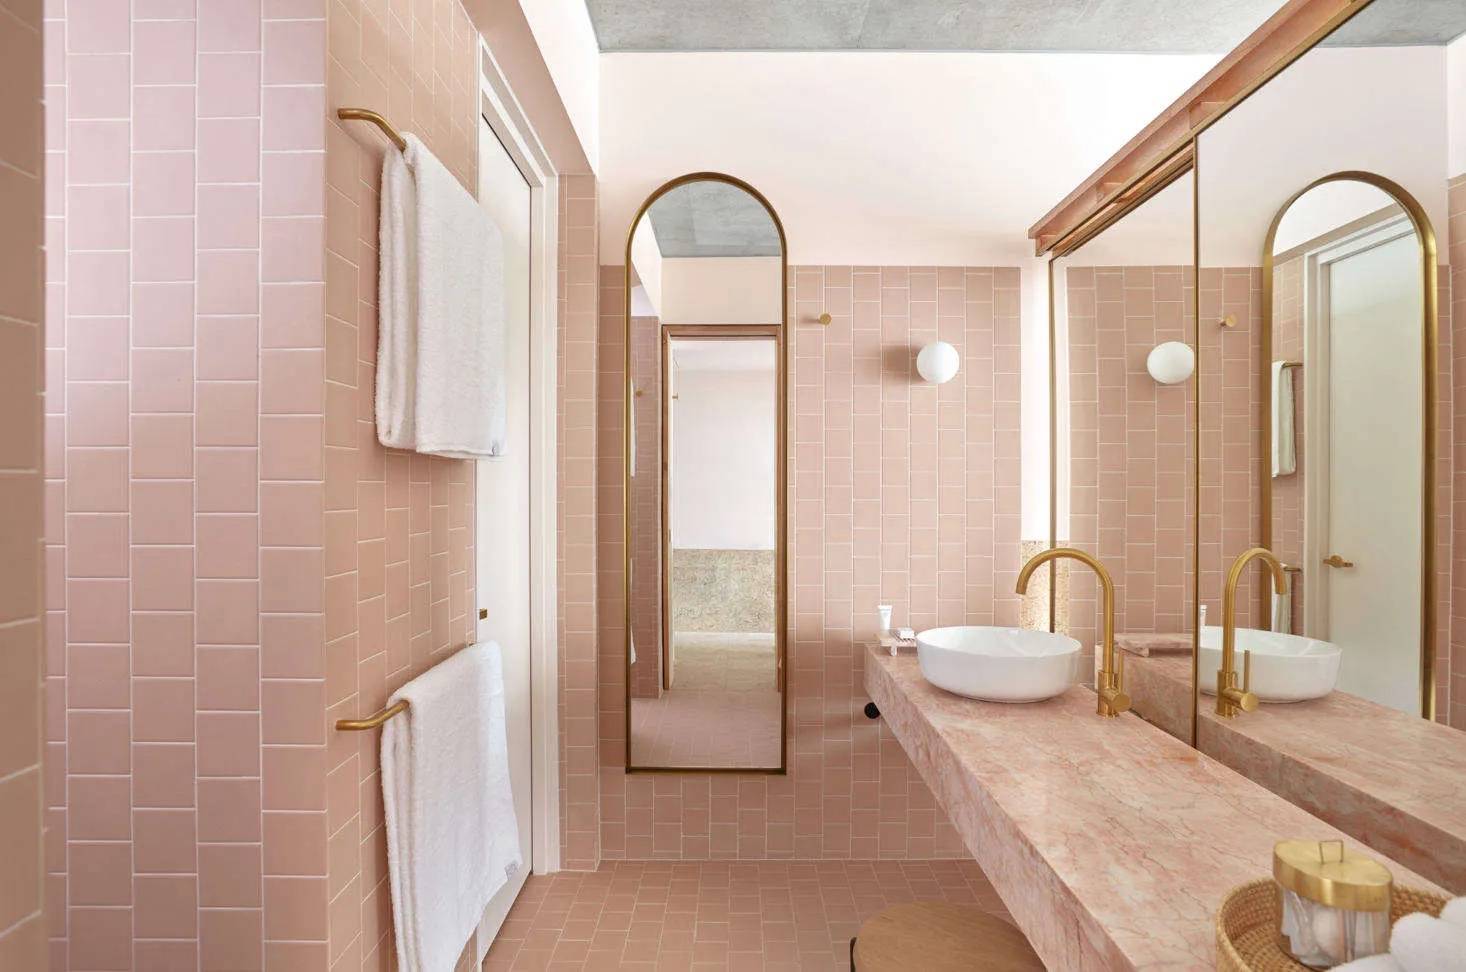 Pink-Tiled-Walls-and-Pink-Vanity-Photo-by-Richards-and-Spence-designed-Calile-Hotel-in-Brisbane-Australia-35555